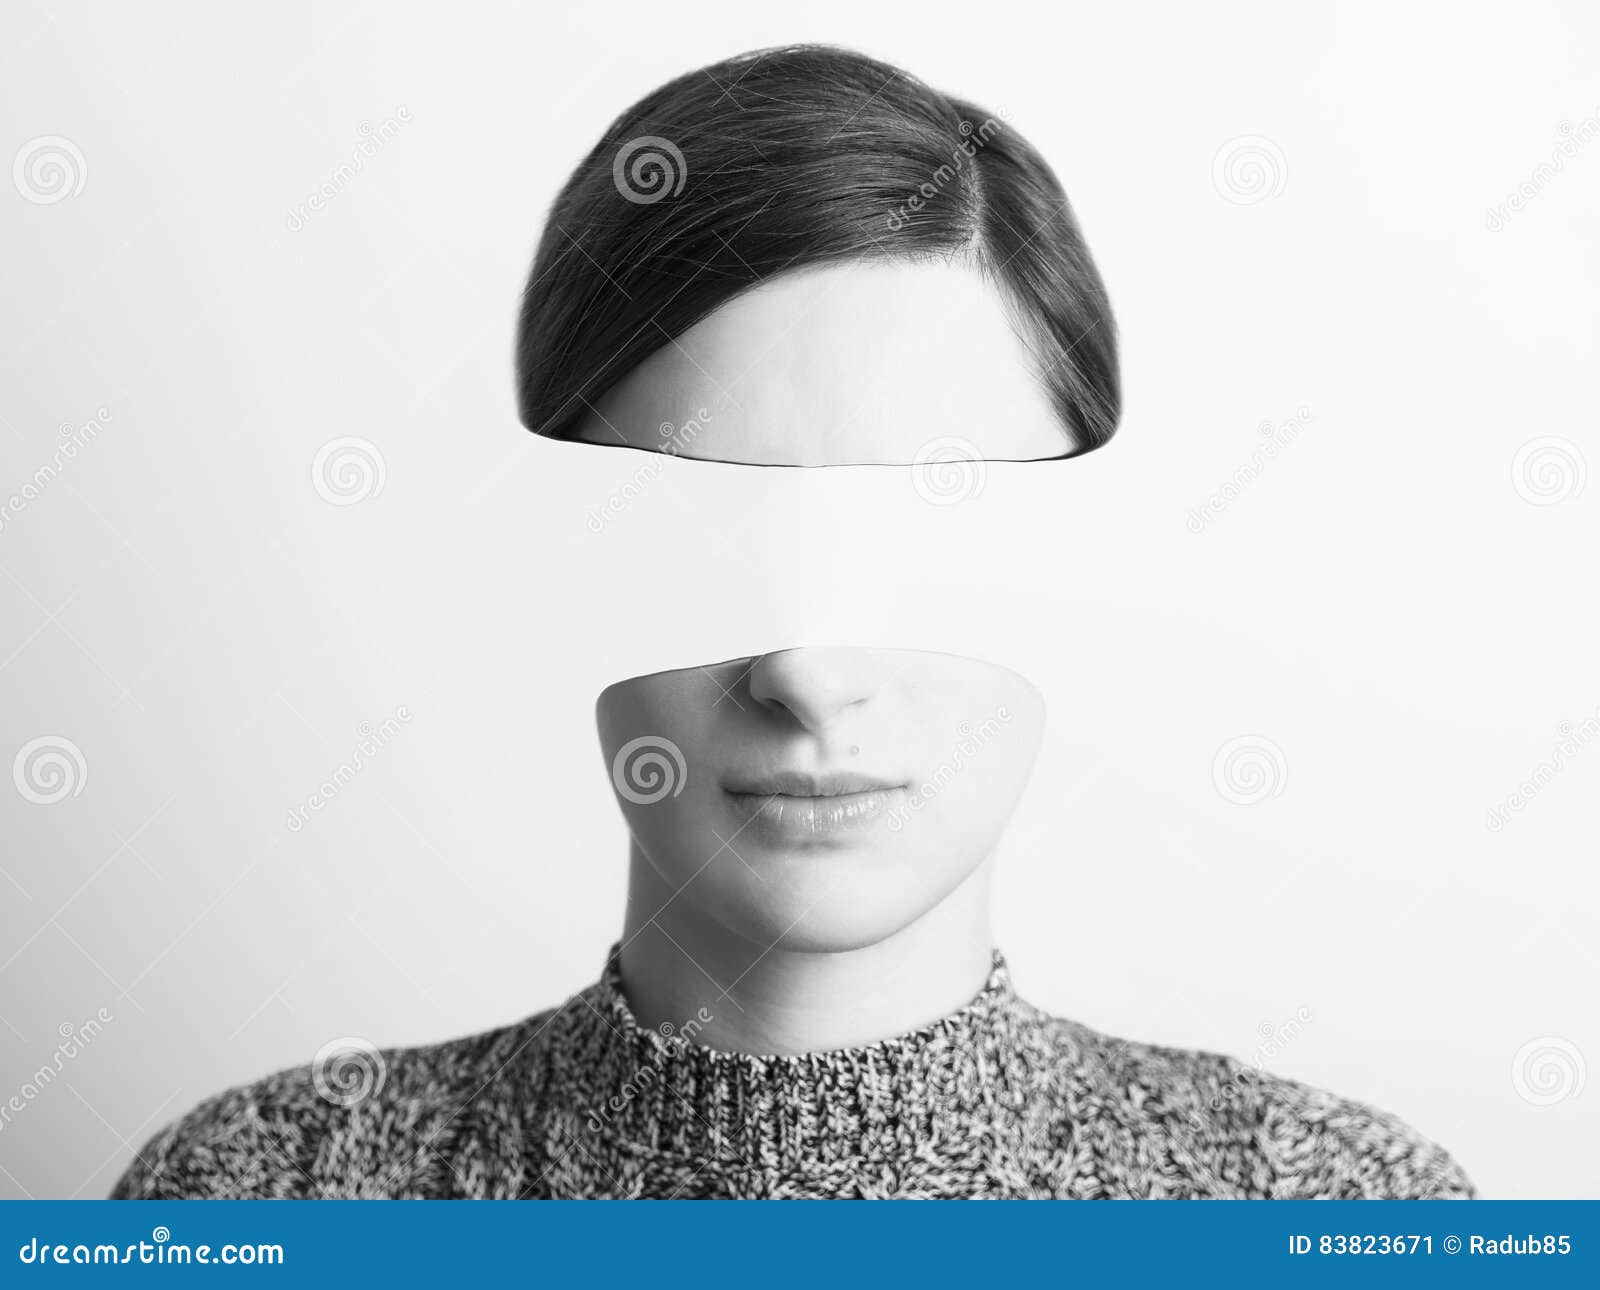 black and white abstract woman portrait of identity theft